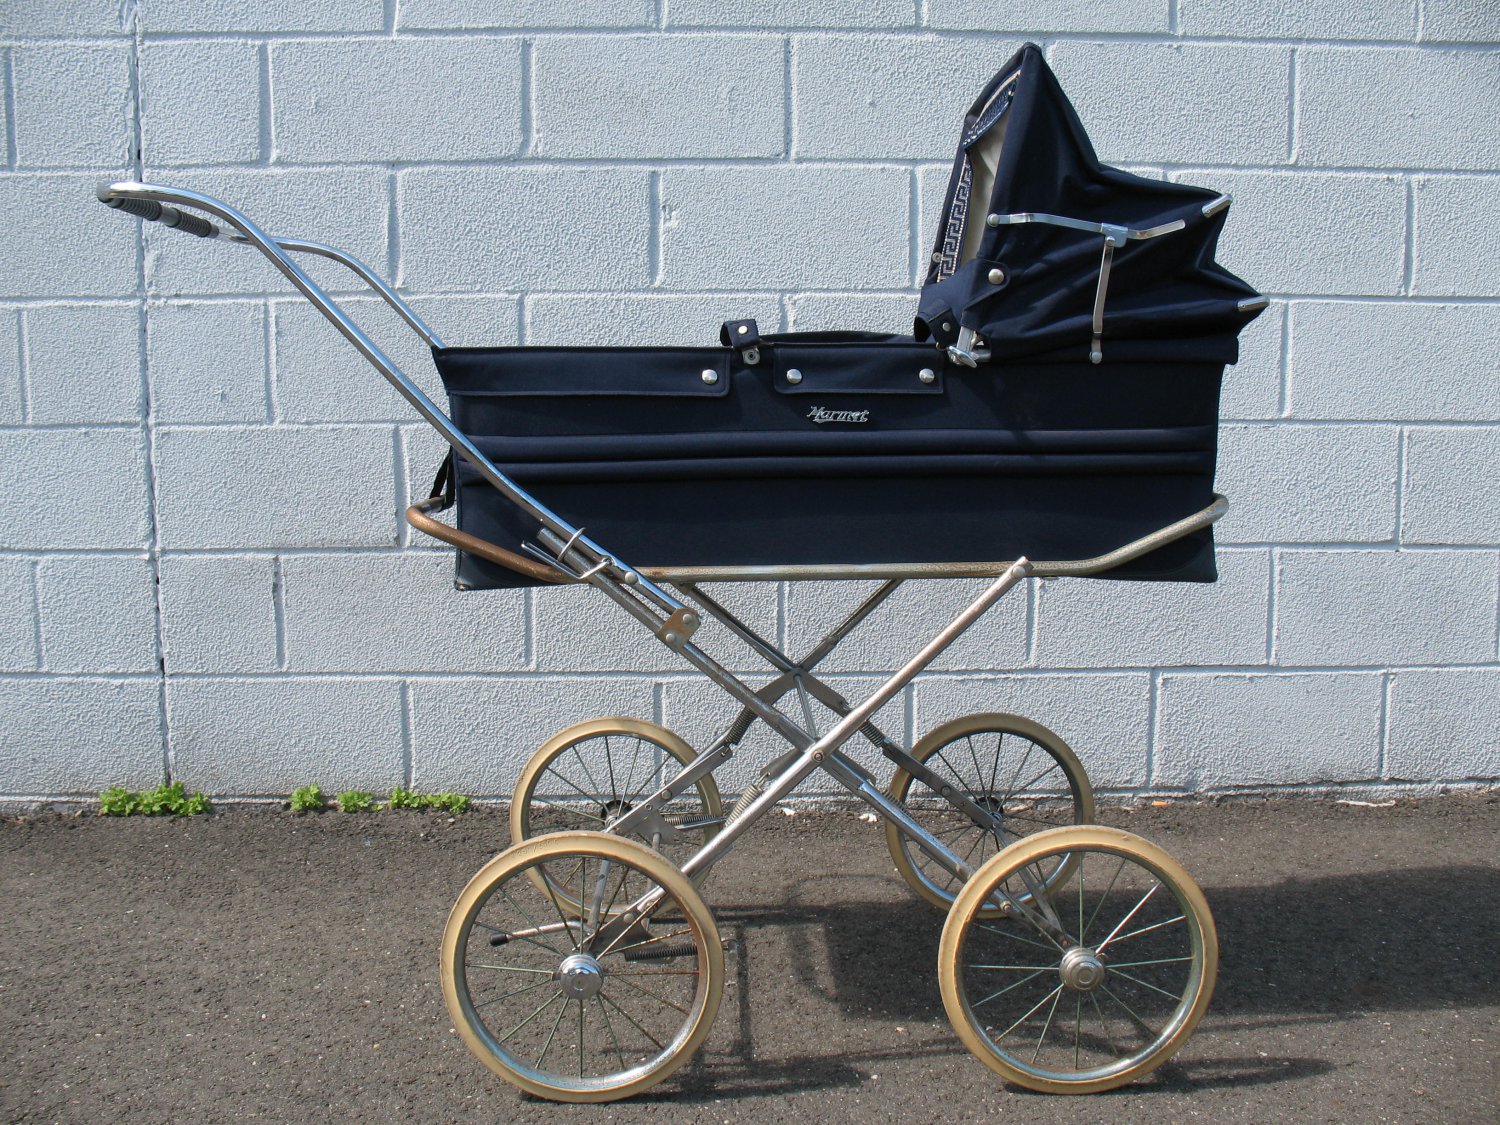 marmet baby carriage